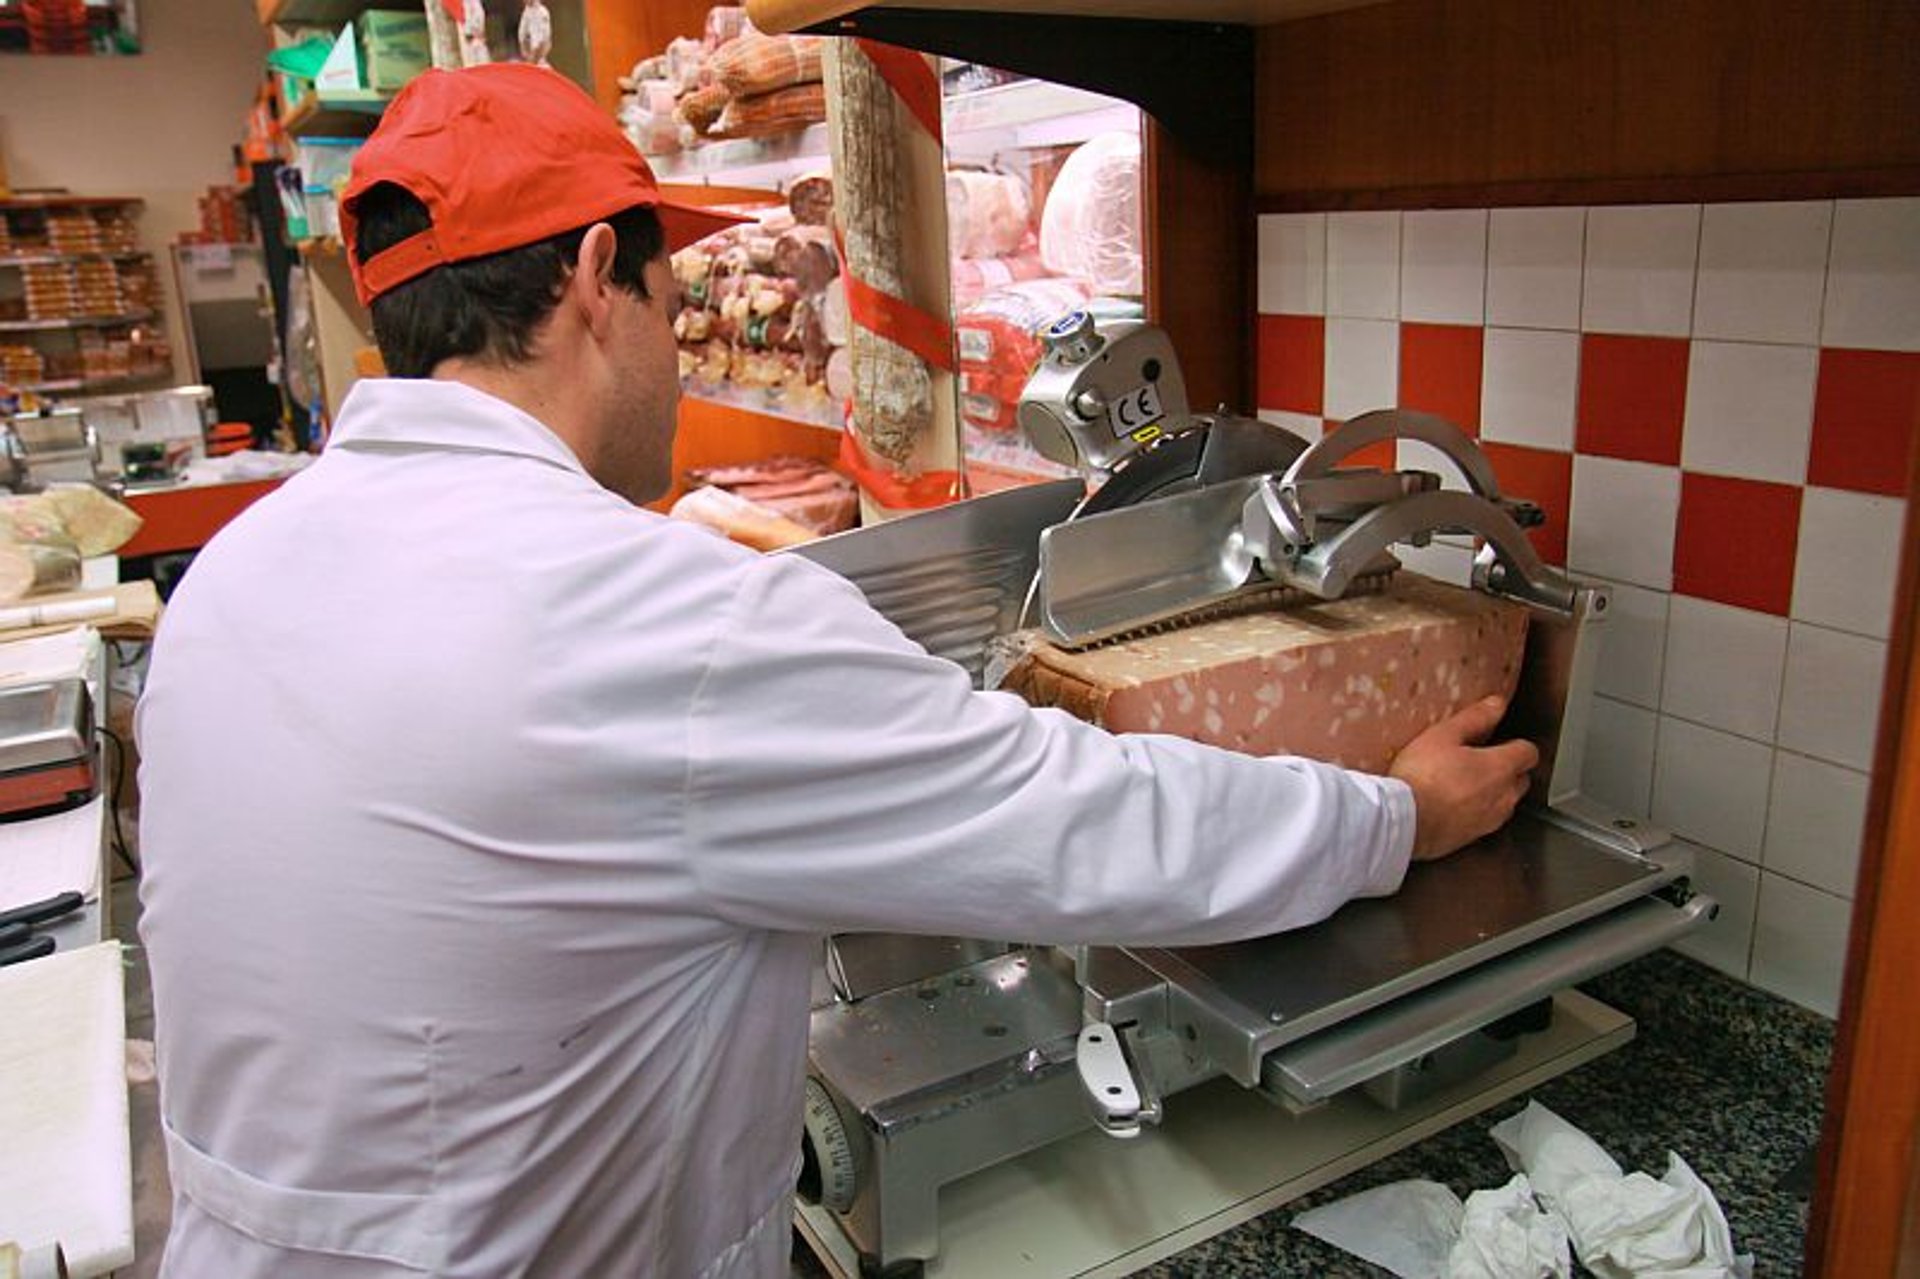 Multistate Listeria Outbreak From Deli Meat, Cheese Sickens 13, 1 Death